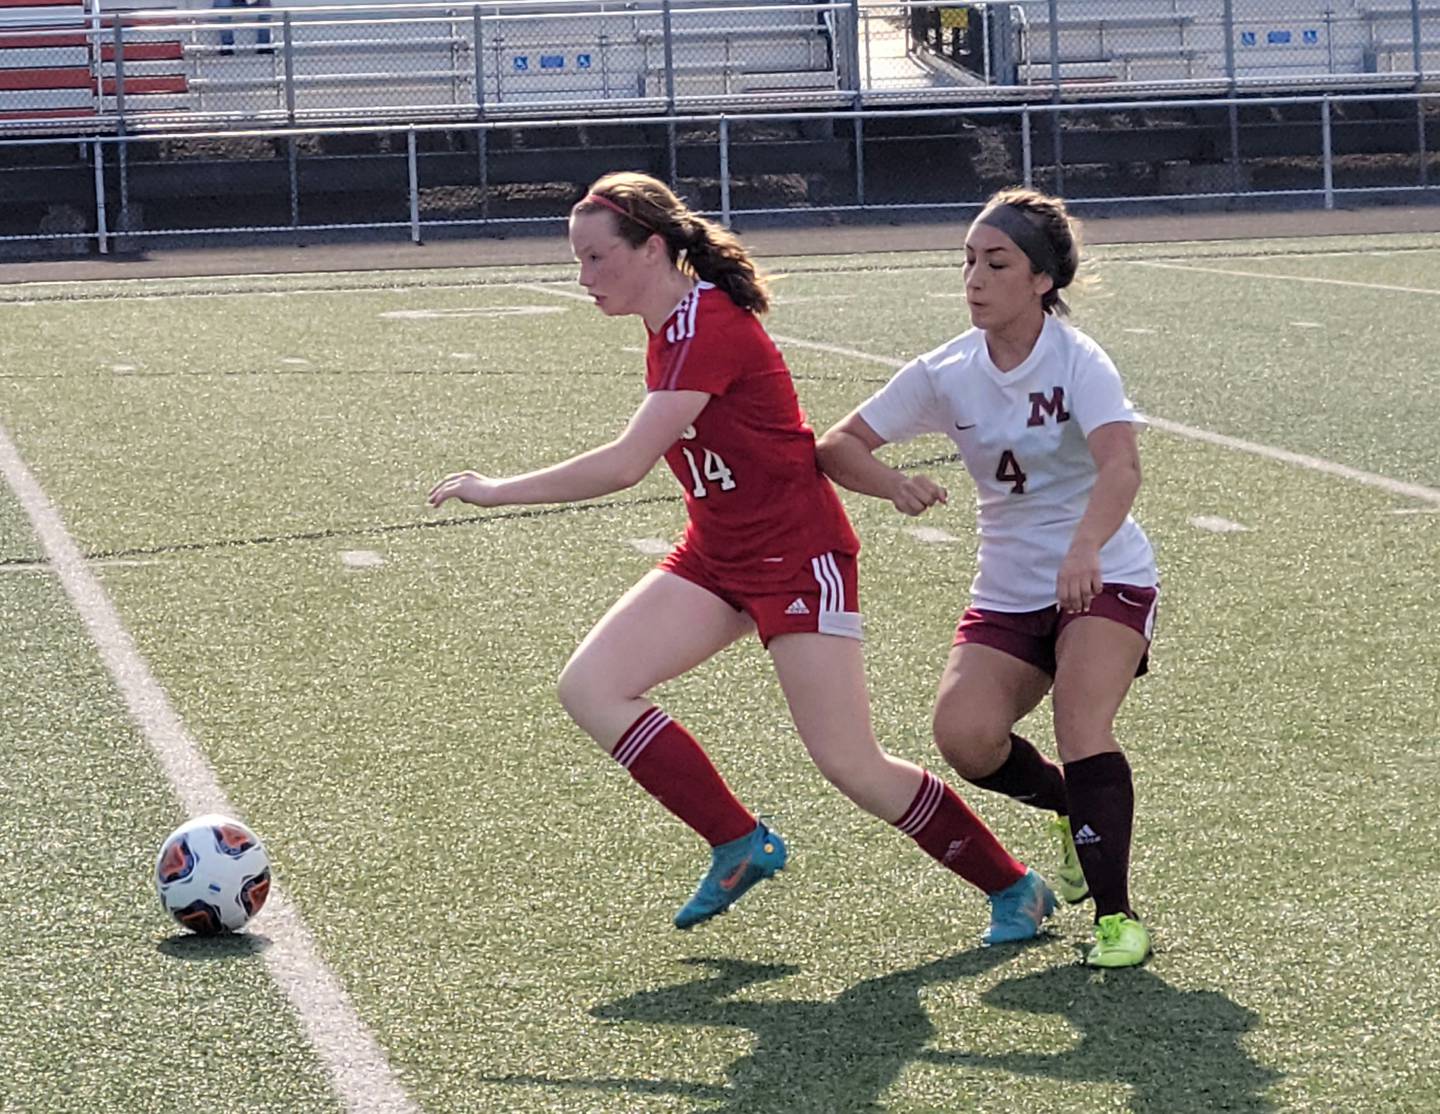 Streator's Bridget McGurk (14) looks for an open teammate as Morris' Adrana Plascencia (4) defends during the Class 2A regional semifinal Wednesday, May 18, 2022, at Washington High School.